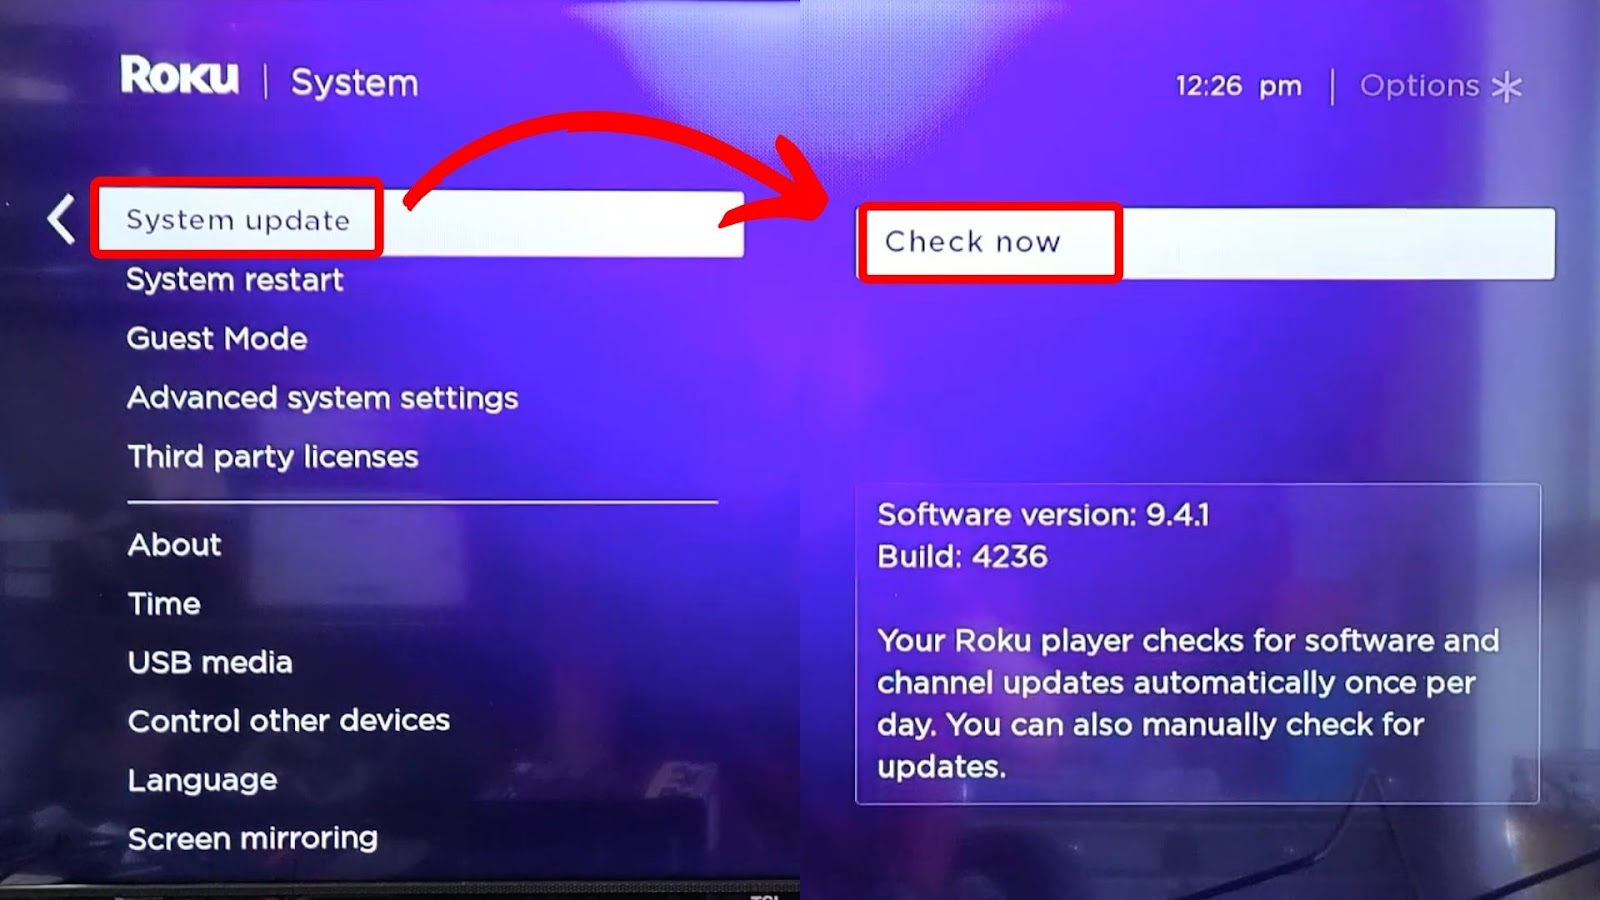 How to Check for Roku TV System Updates